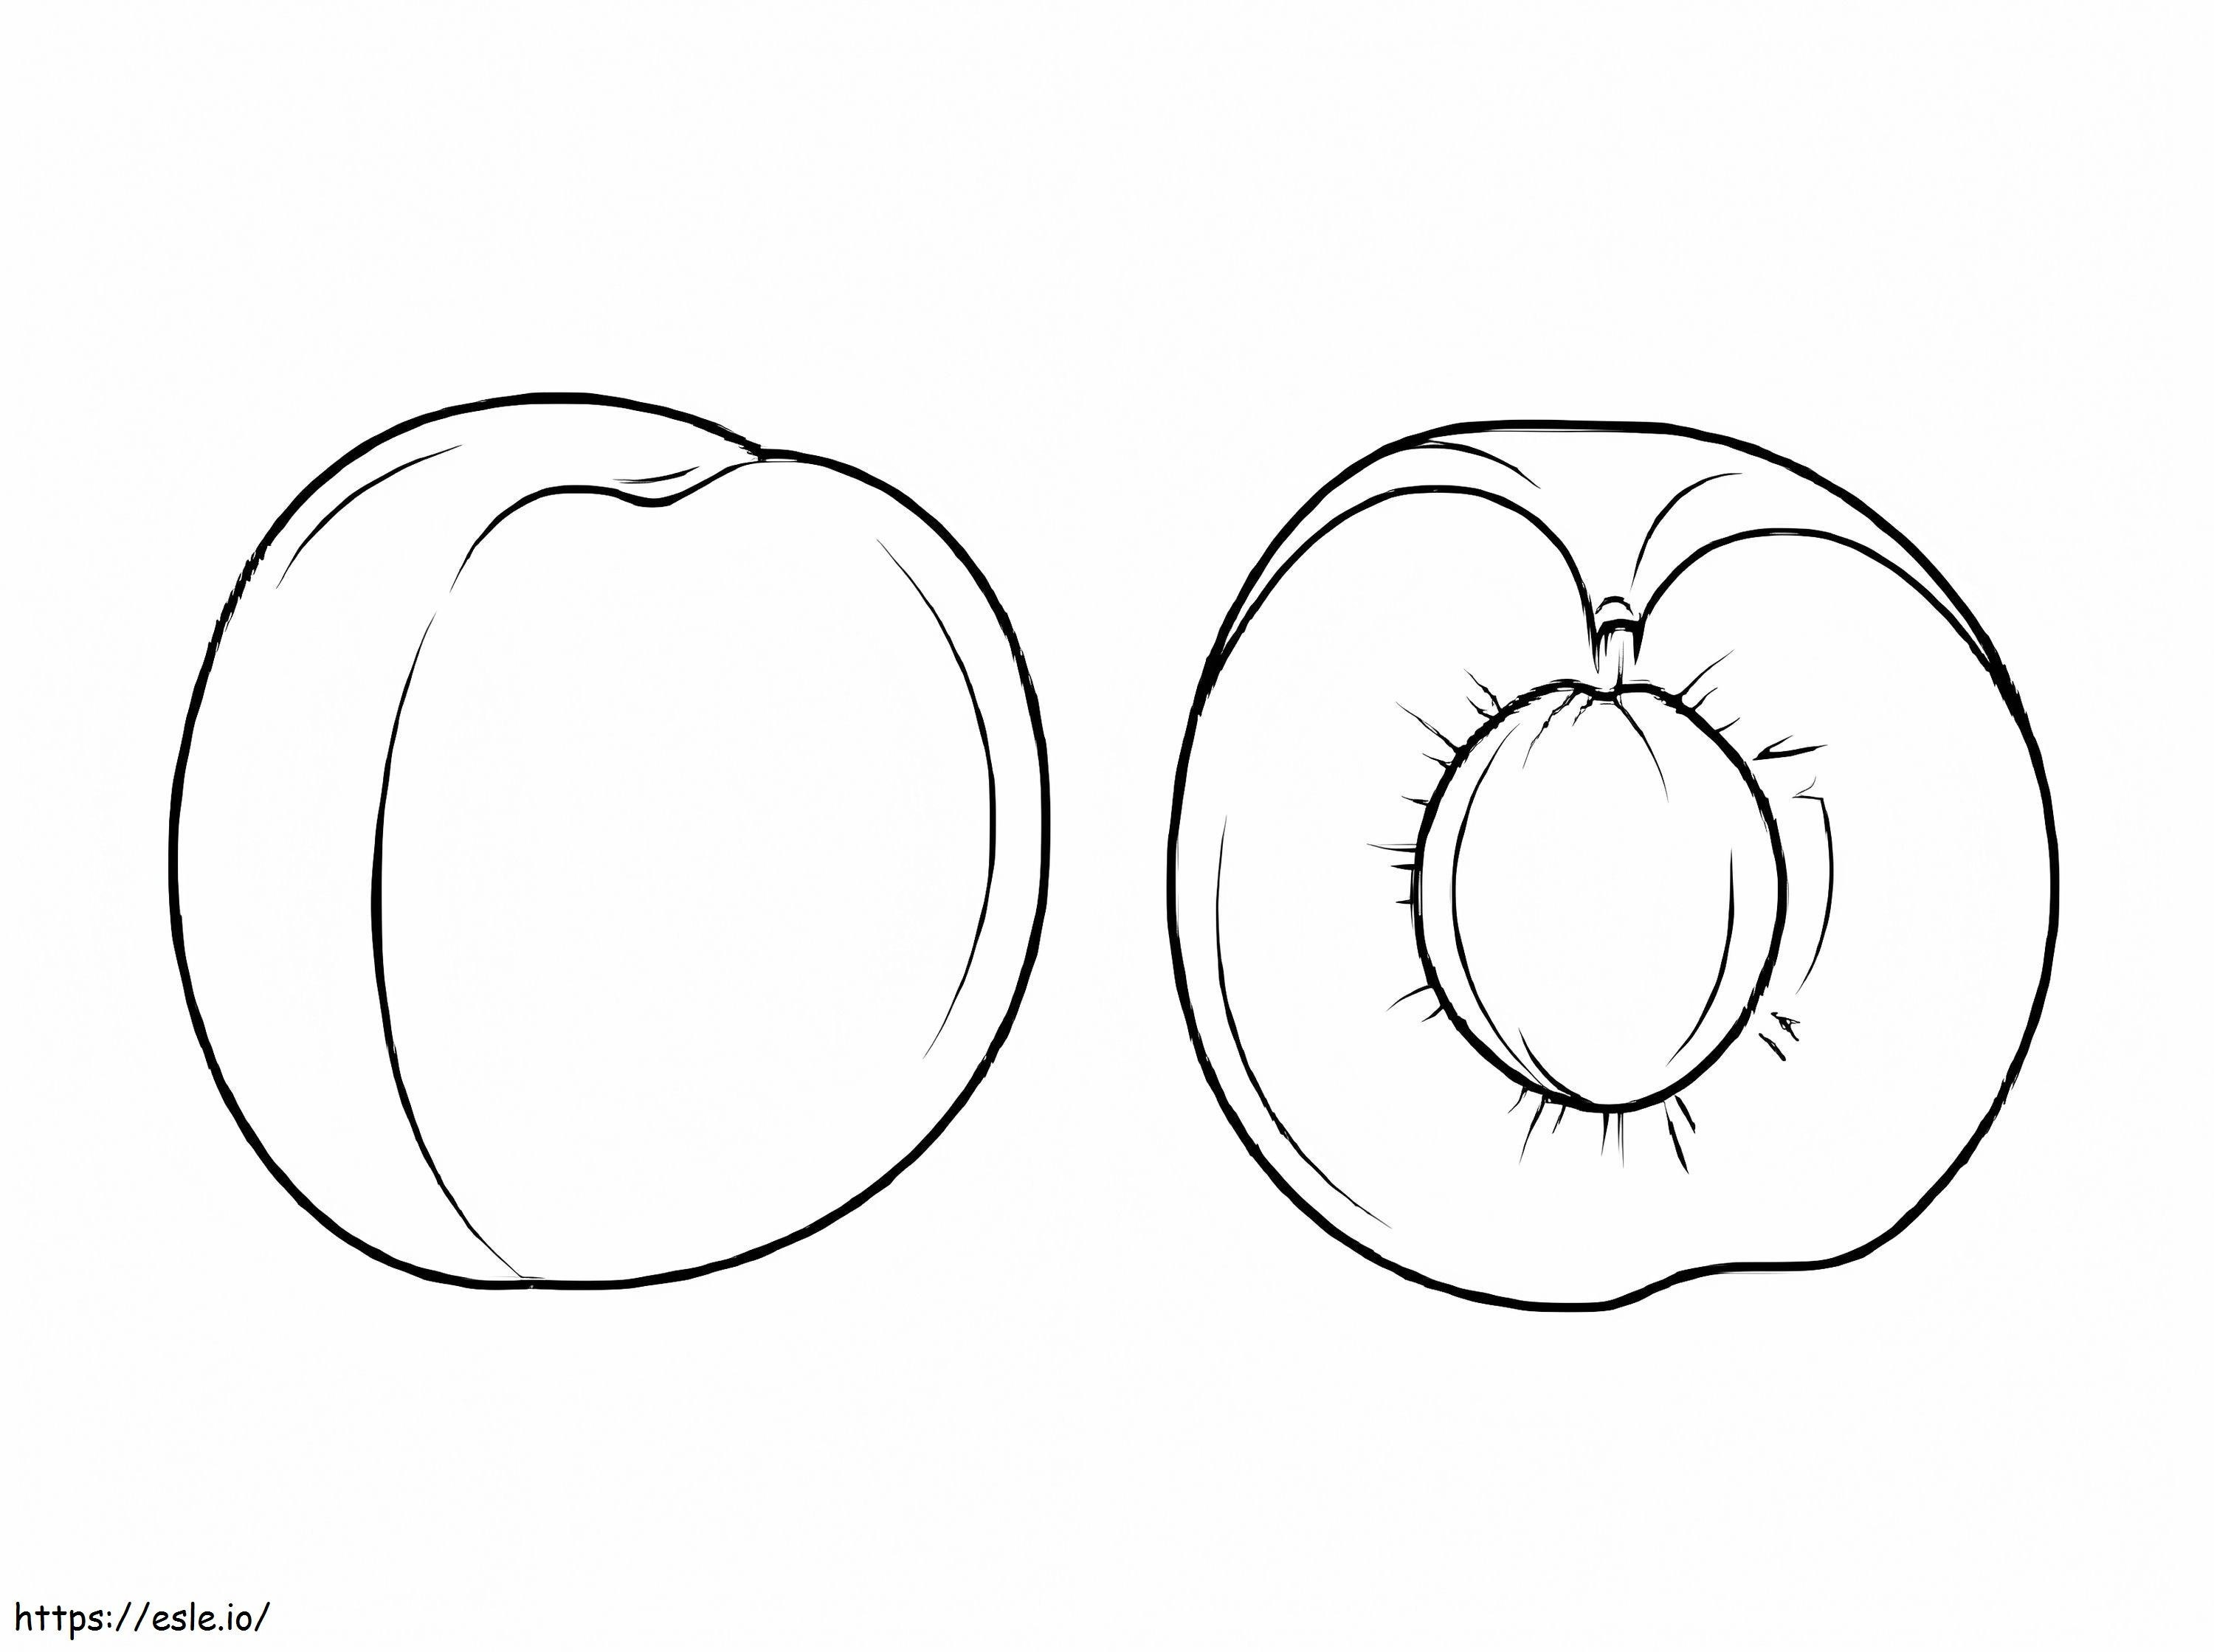 Apricot 7 coloring page